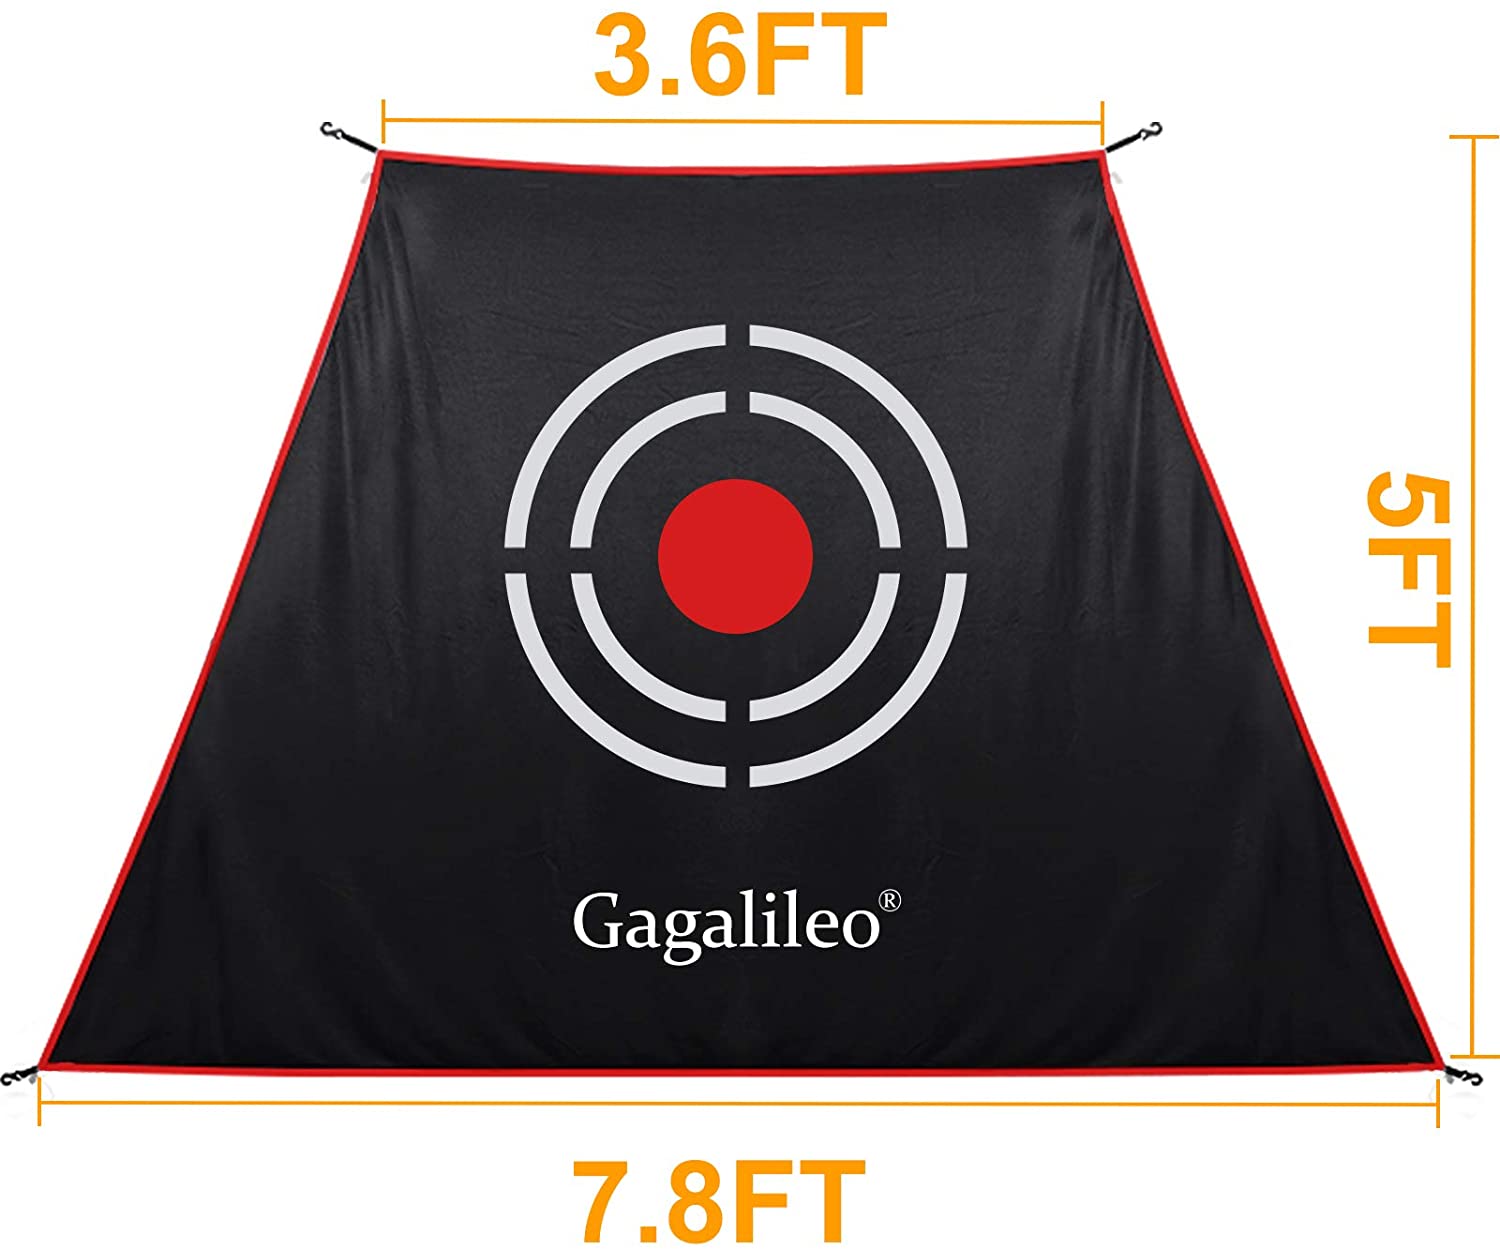 10X7X6 Golf Target Replacement for the Galileo Golf Net